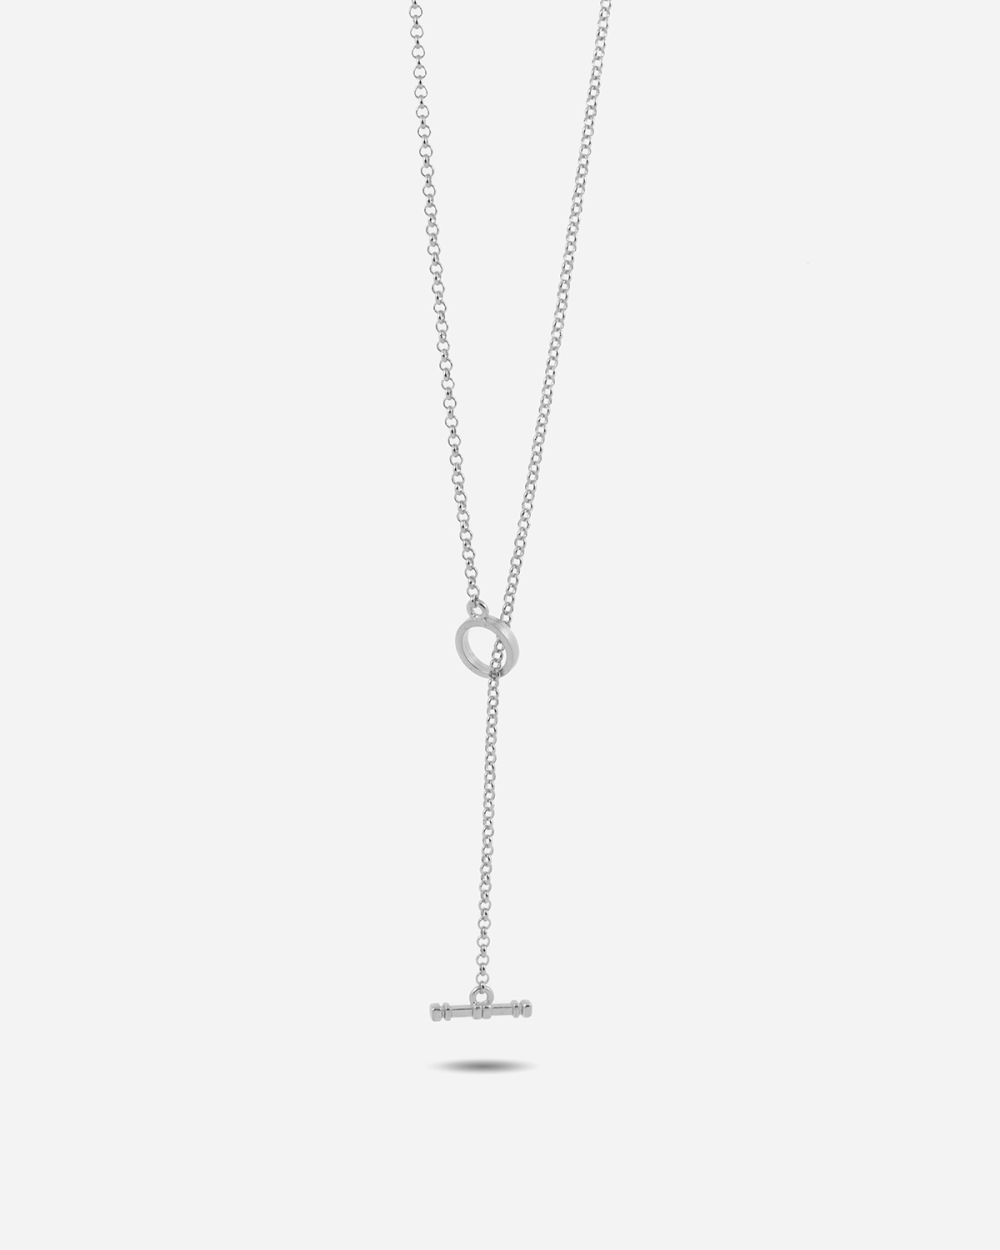 SILVER ROLO 300 WITH T-BAR NECKLACE - 70